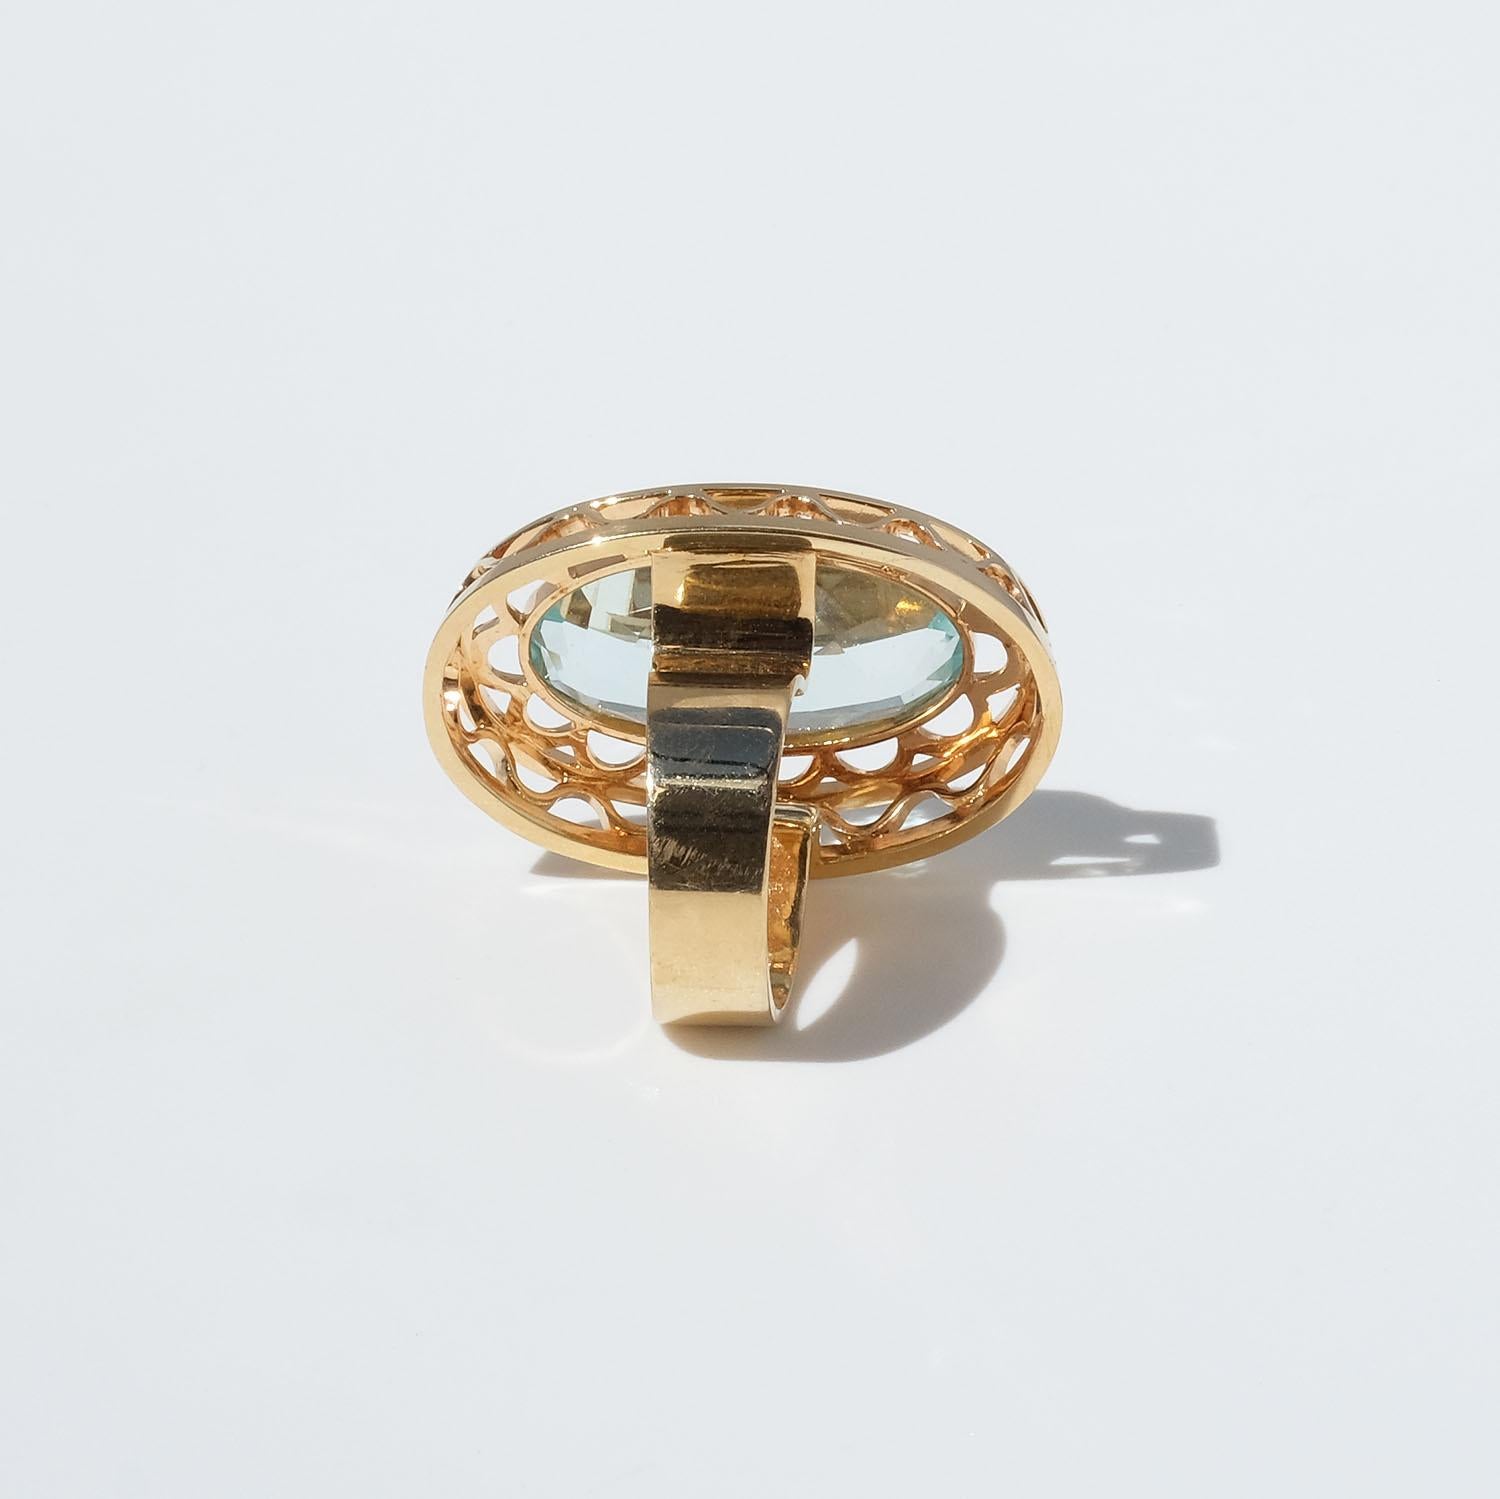 Vintage 18k Gold and Aquamarine Ring by Master Anders Högberg Year, 1977 For Sale 4